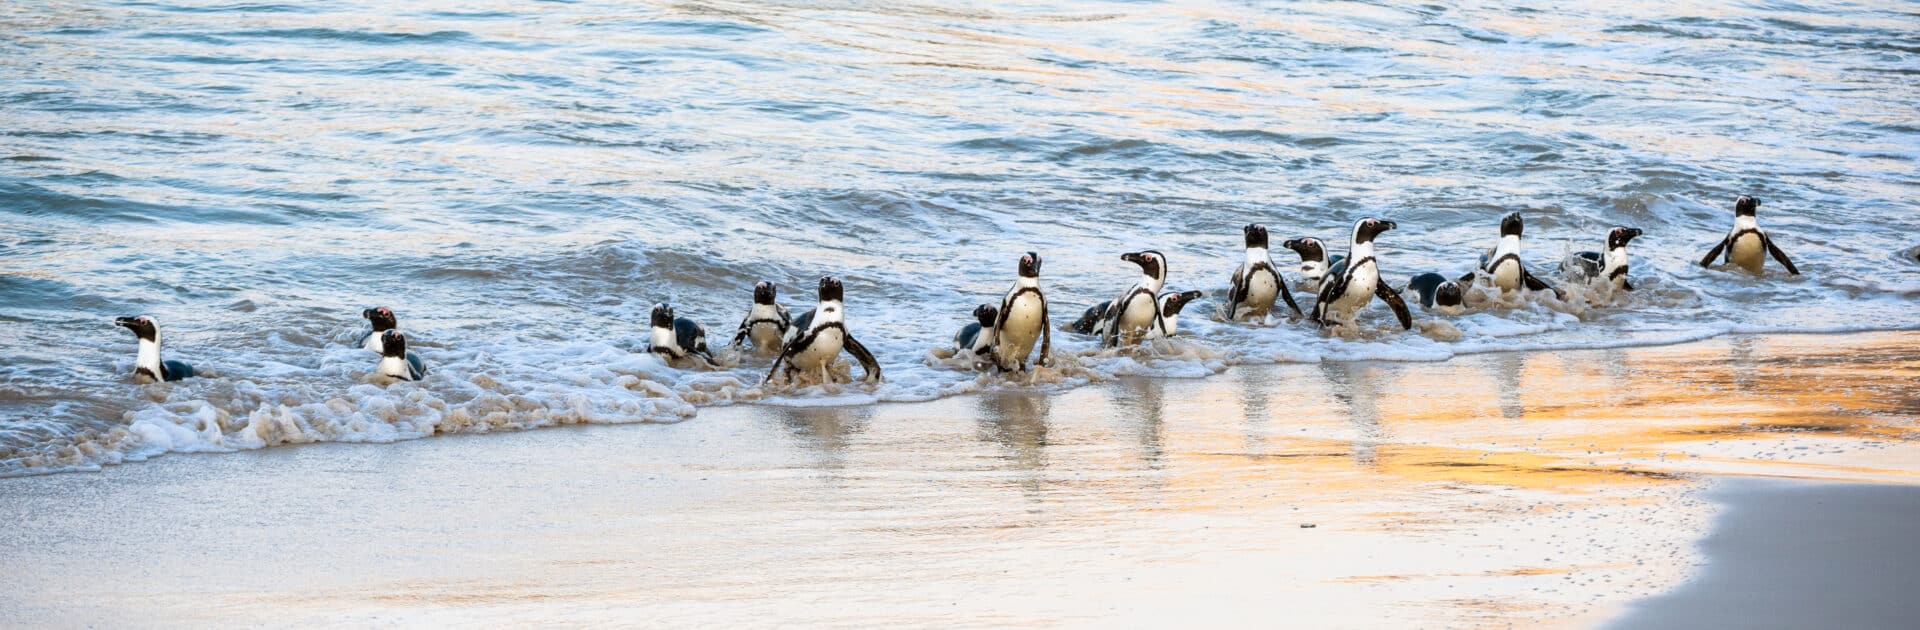 Penguins on Boulder's Beach in Cape Town, South Africa